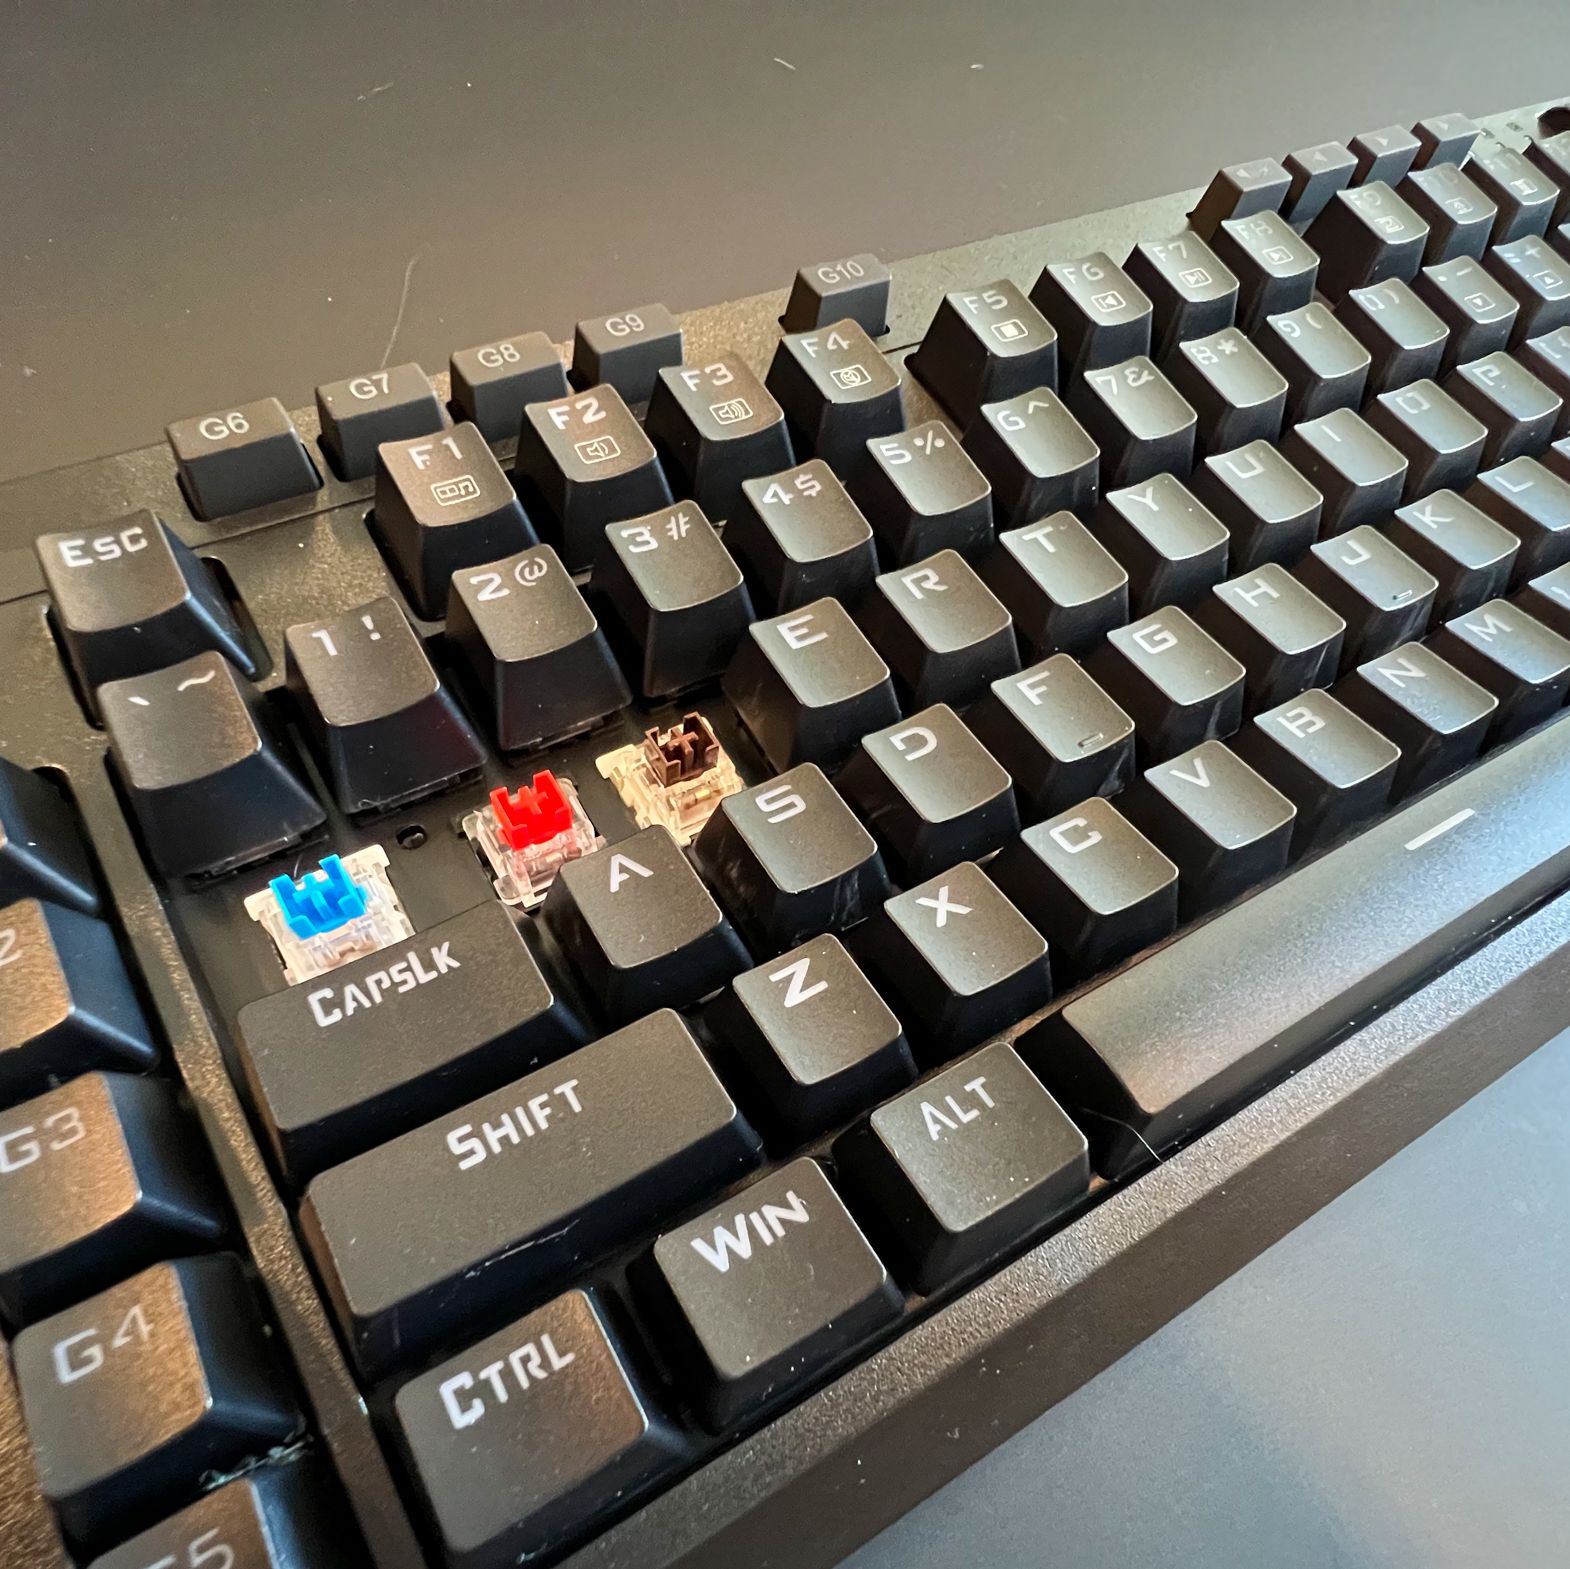 The Perfect Budget Wireless Keyboard Doesn't Exist—So I Customized My Own